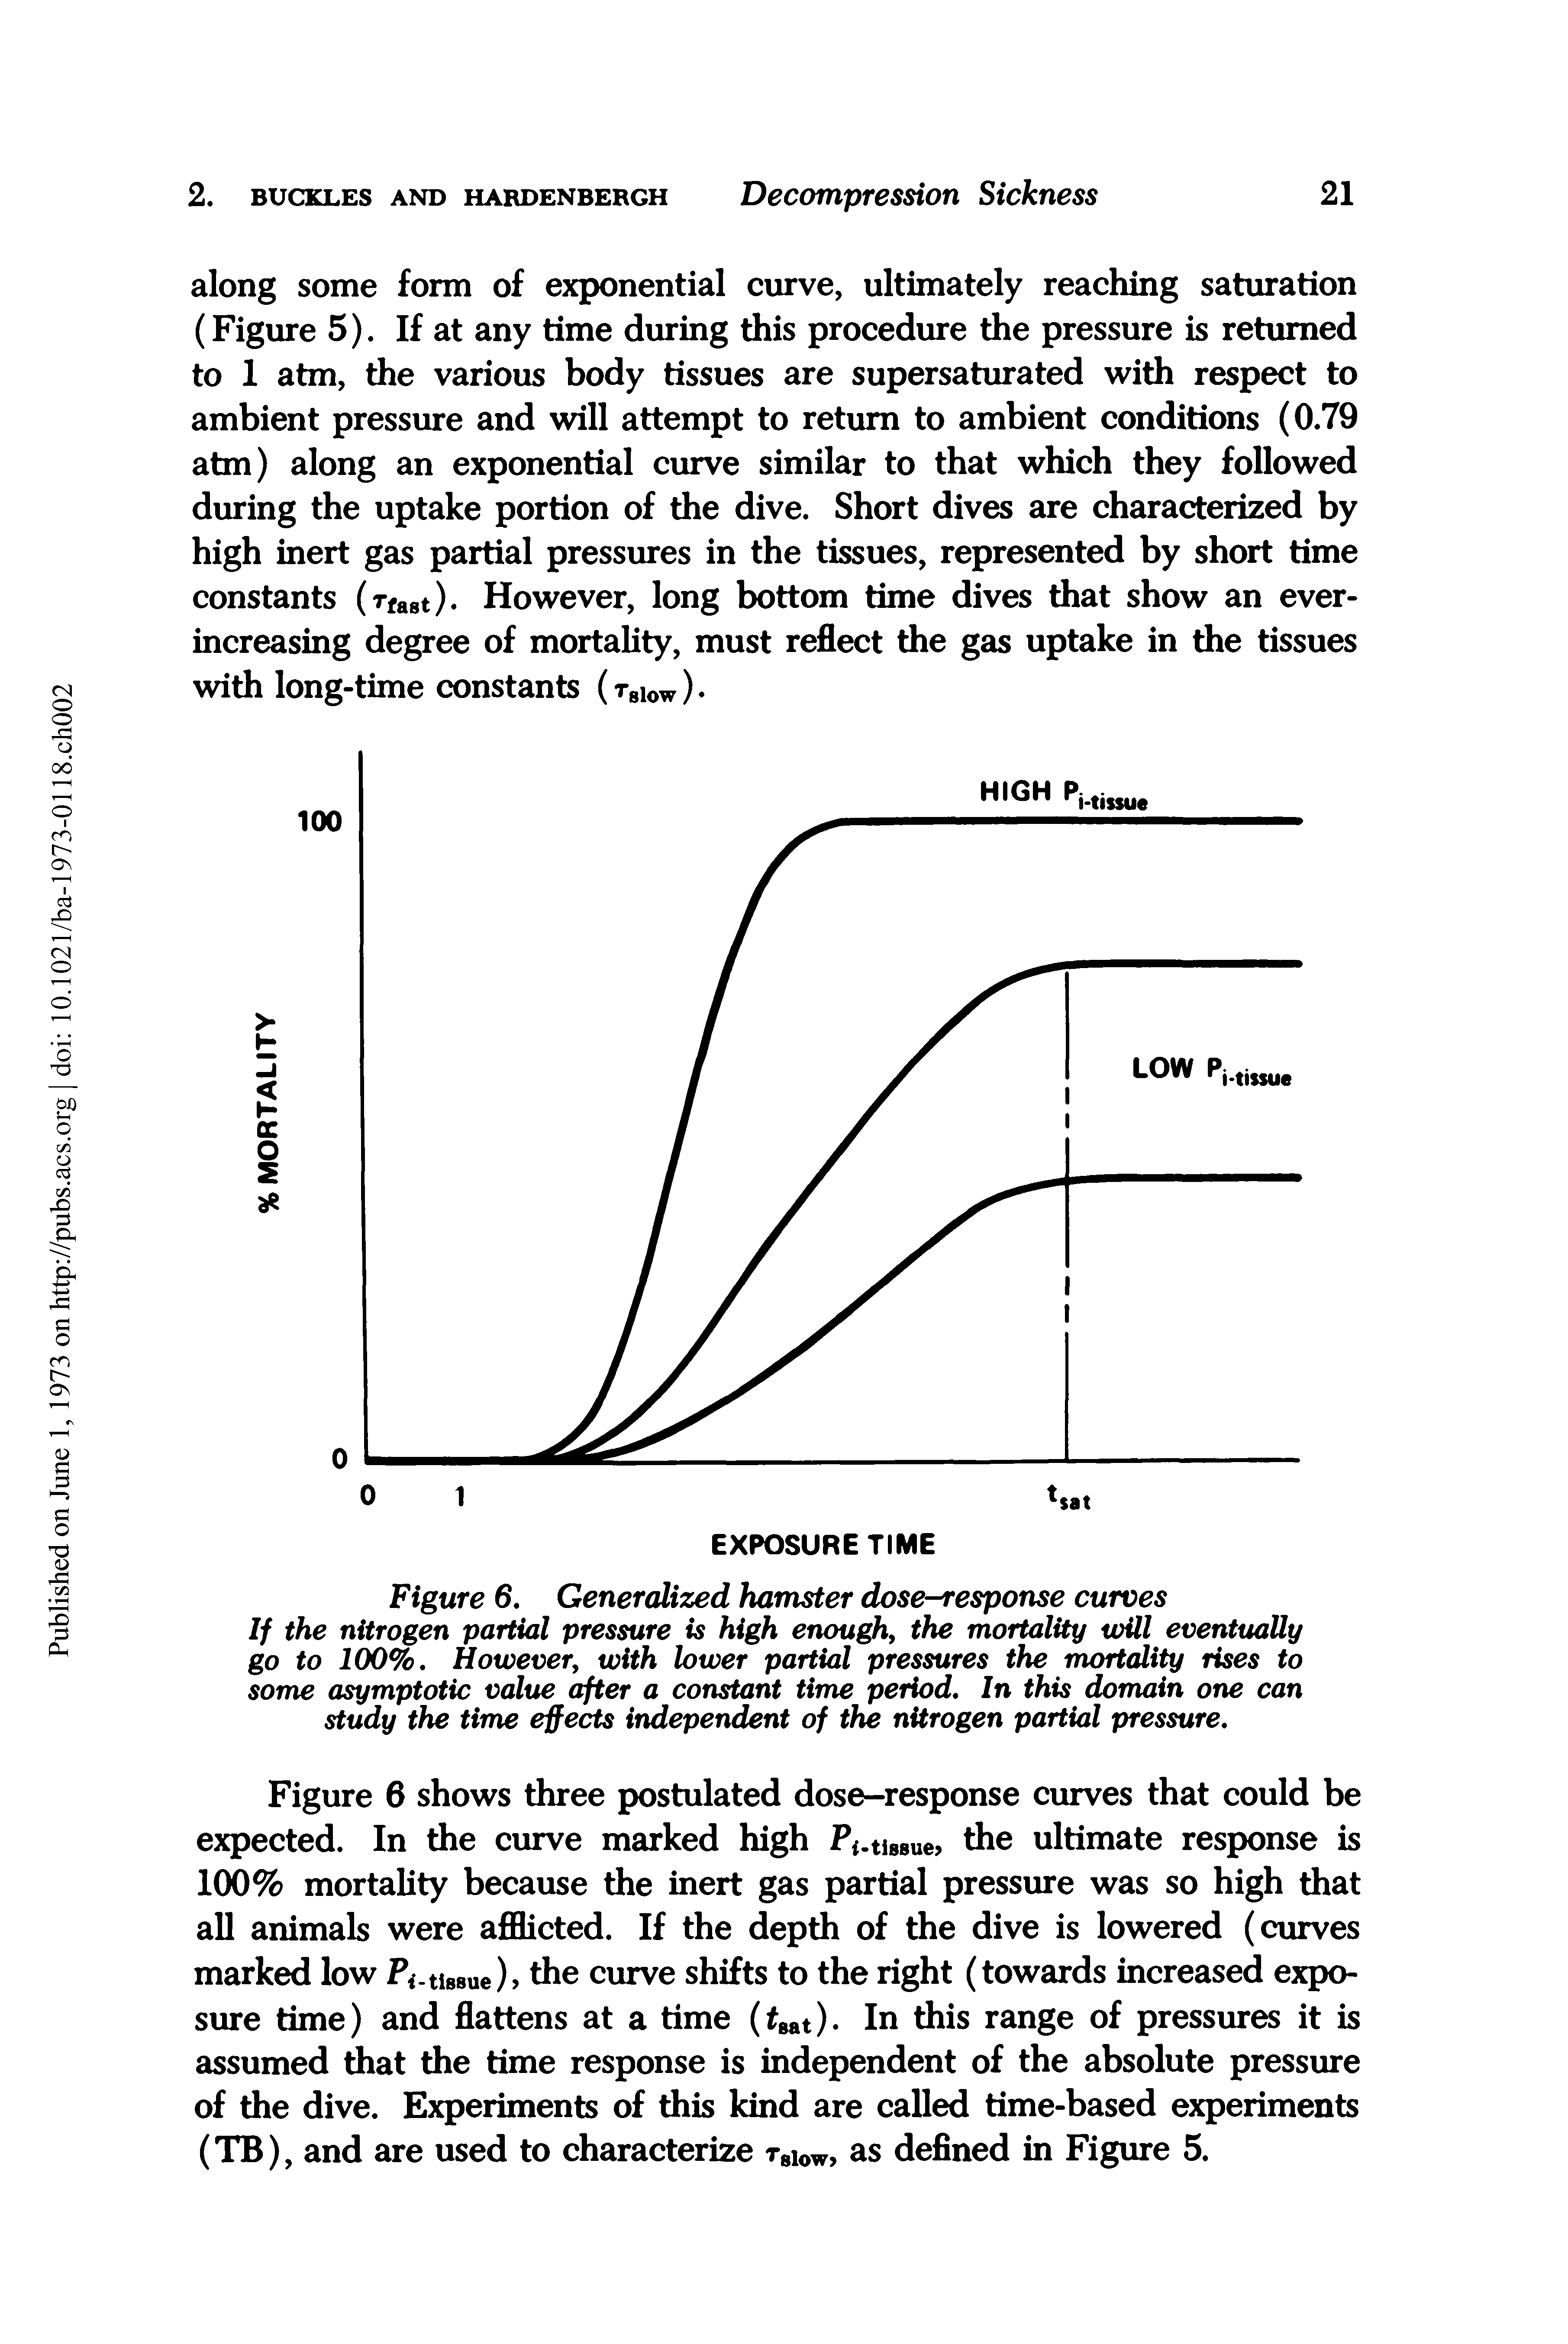 Figure 6. Generalized hamster dose-response curves If the nitrogen partial pressure is high enough, the mortality will eventually go to 100%. However, with lower partial pressures the mortality rises to some asymptotic value after a constant time period. In this domain one can study the time effects independent of the nitrogen partial pressure.